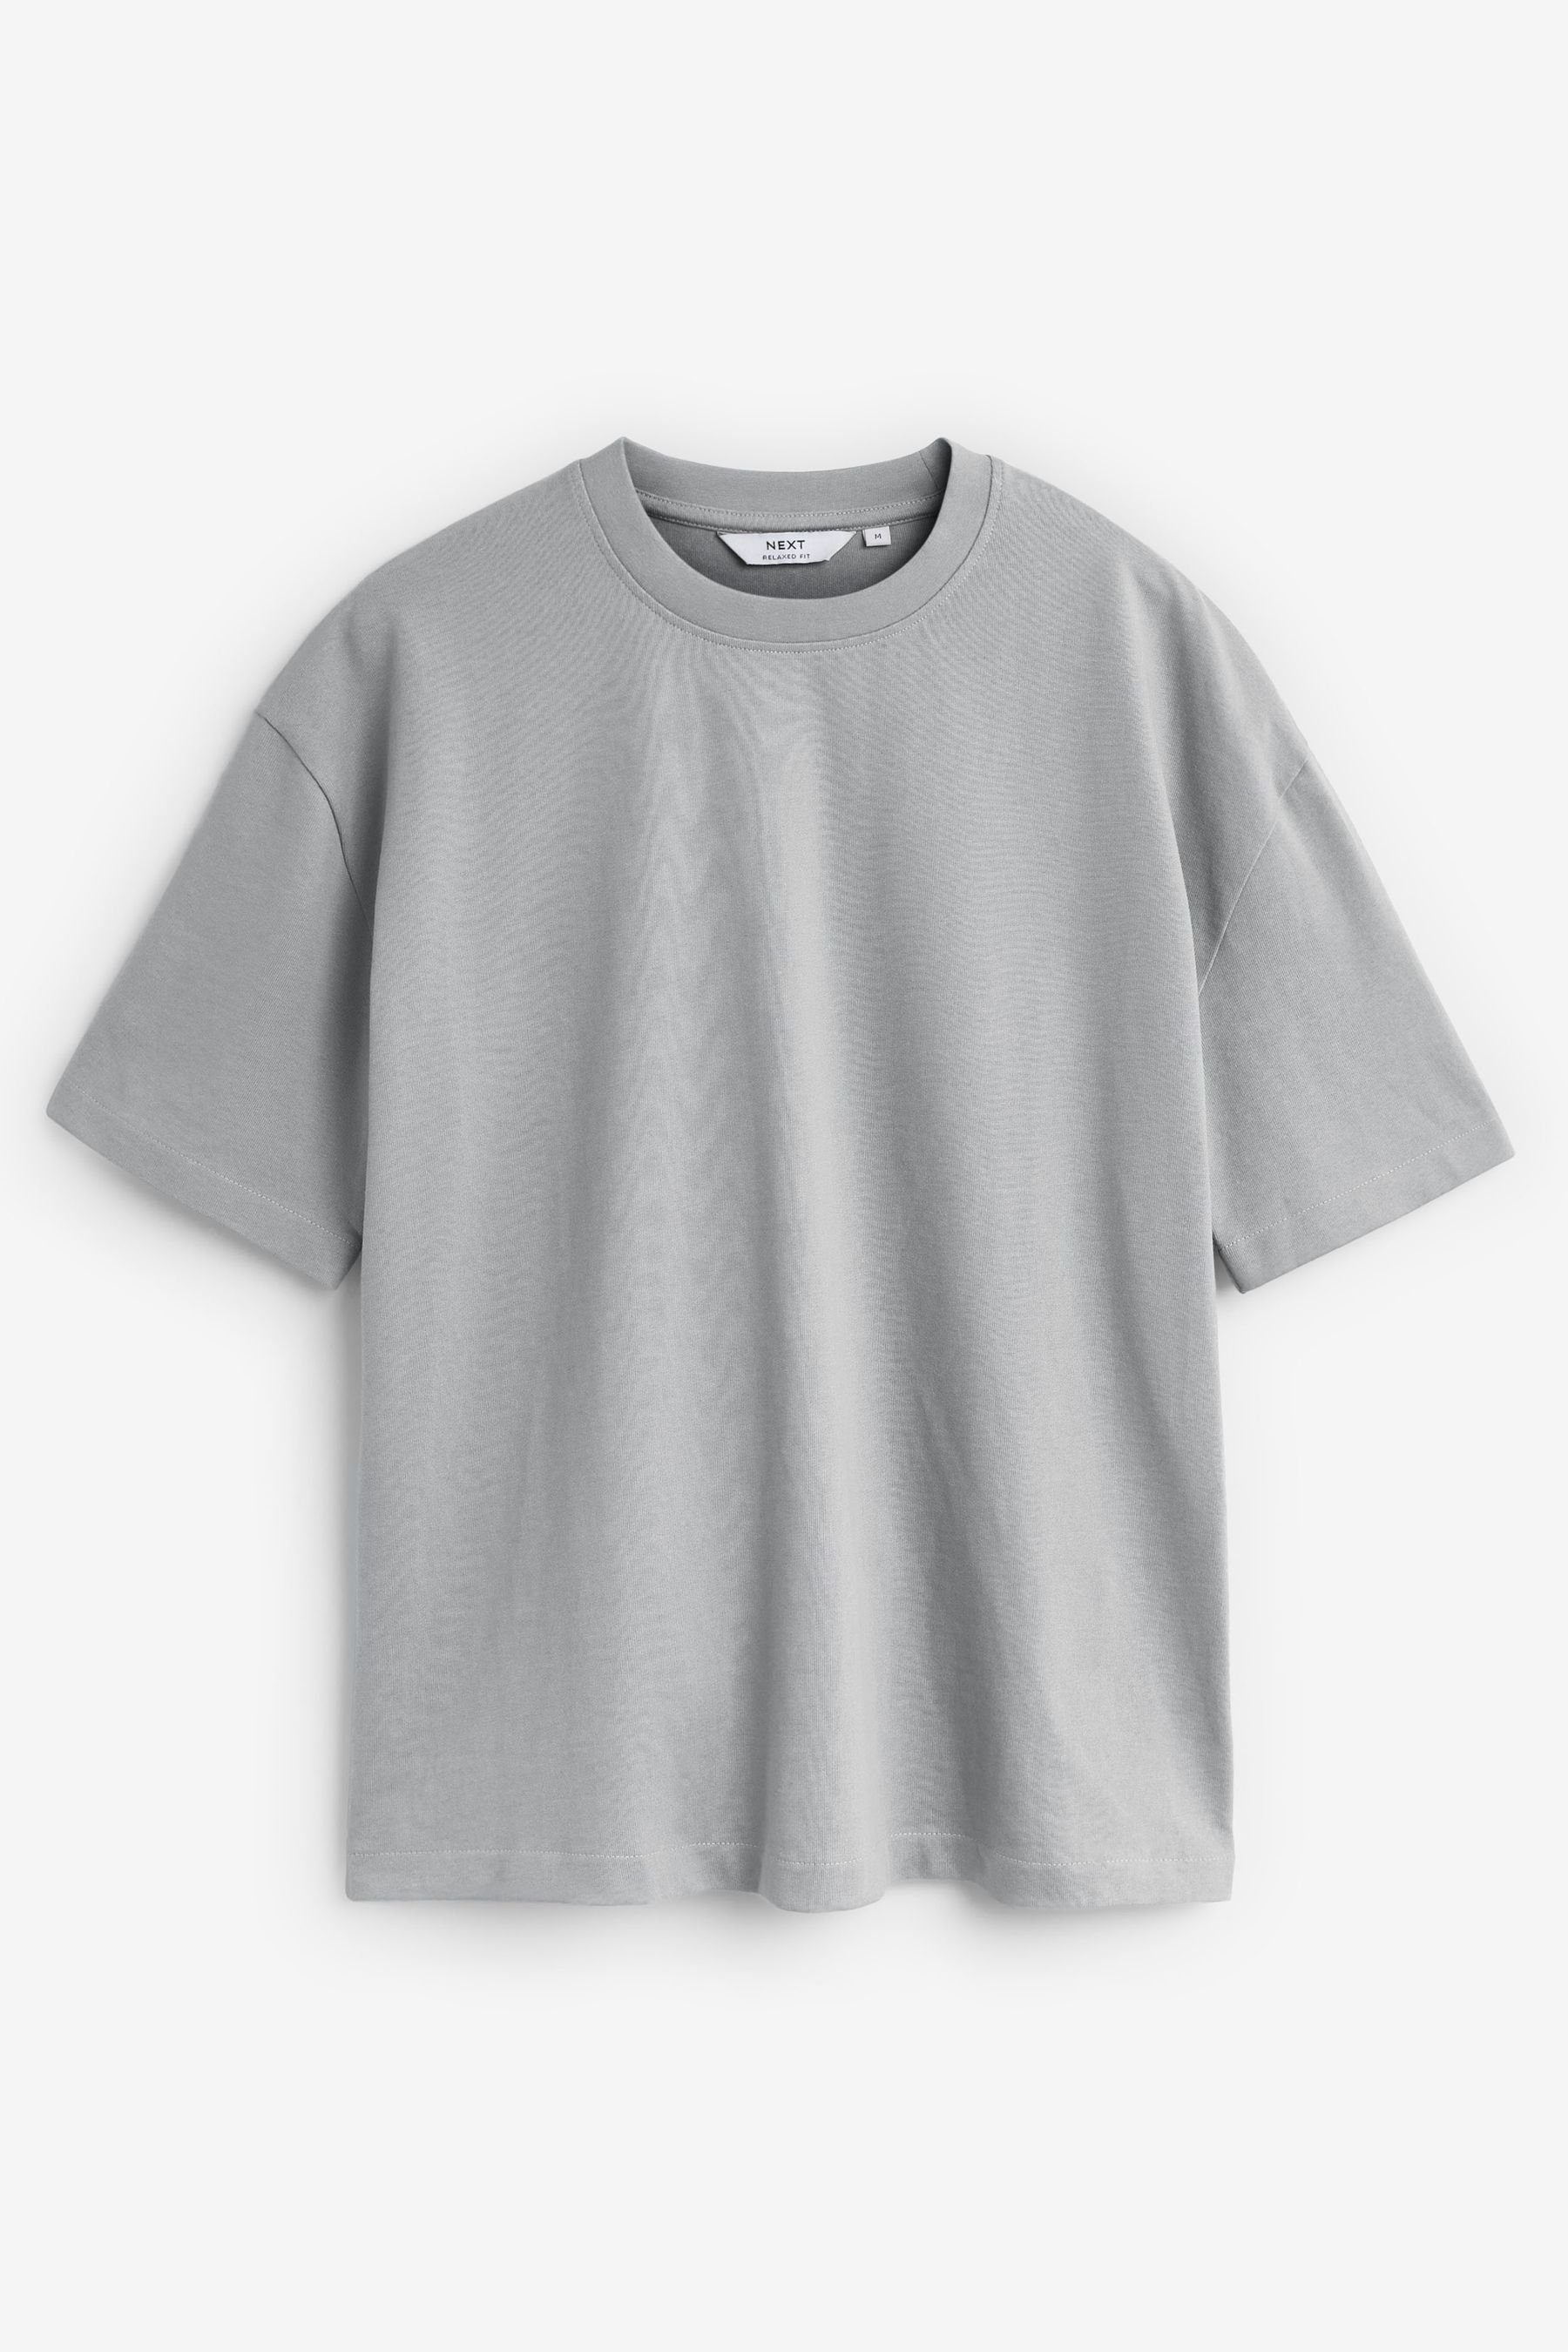 Next T-Shirt Rundhals-T-Shirt im Relaxed Fit (1-tlg) Silver Grey